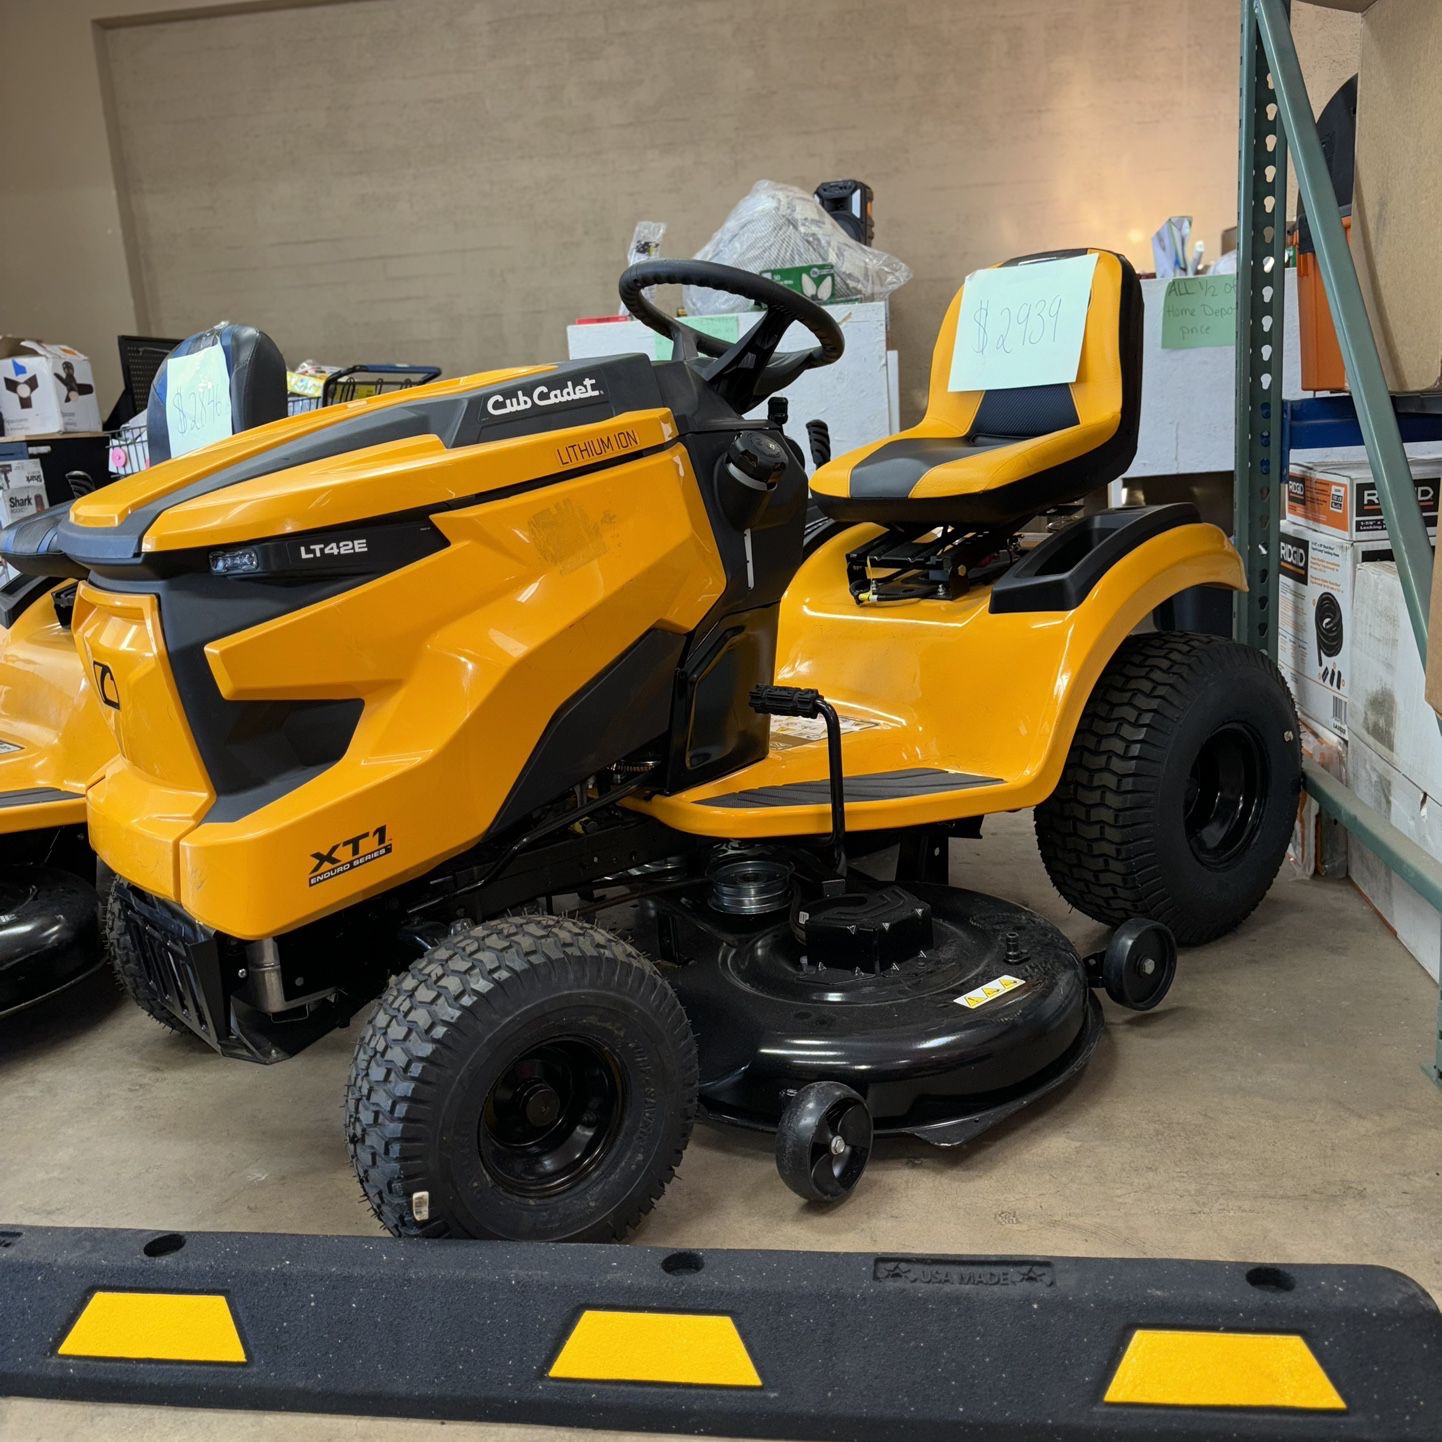 Used Good) Cub Cadet XT1 Enduro Series LT 46 in. 547cc Fuel Injected Hydro Gas Lawn Tractor with Push Button Start